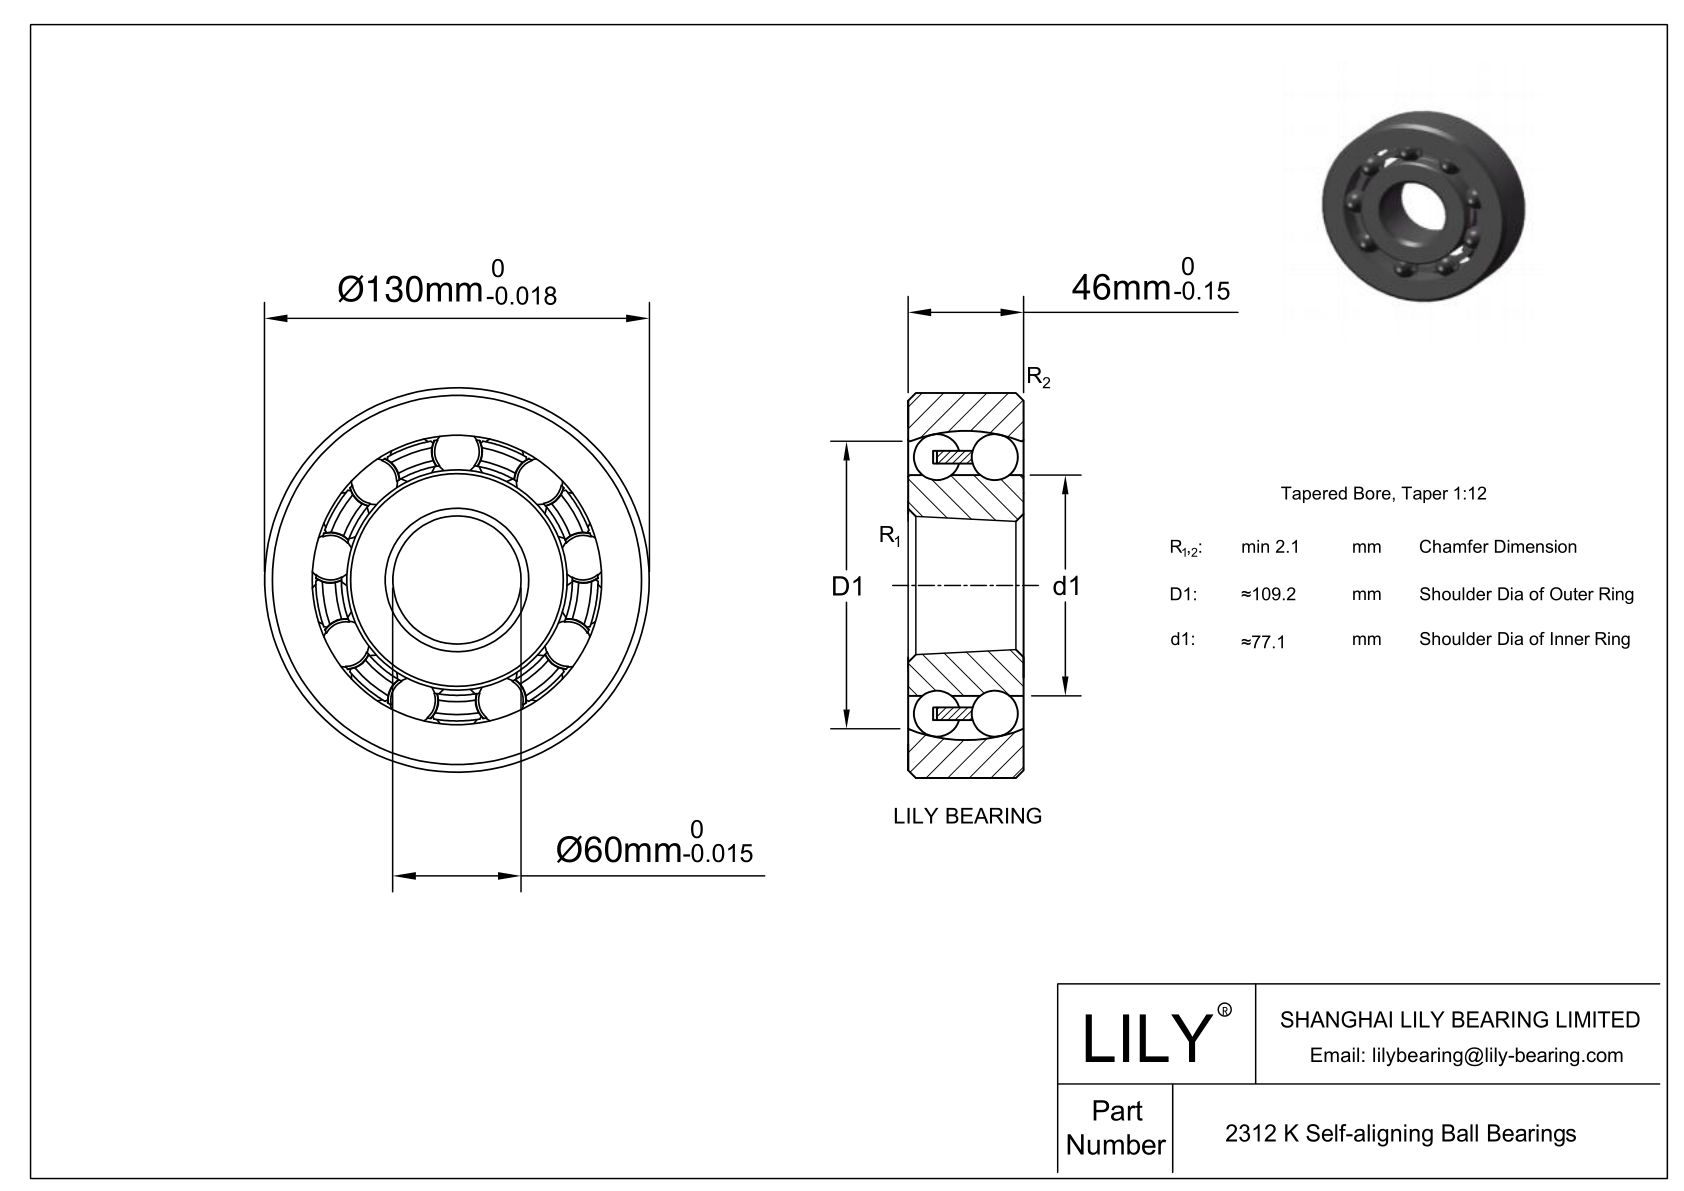 S2312 K Stainless Steel Self Aligning Ball Bearings cad drawing